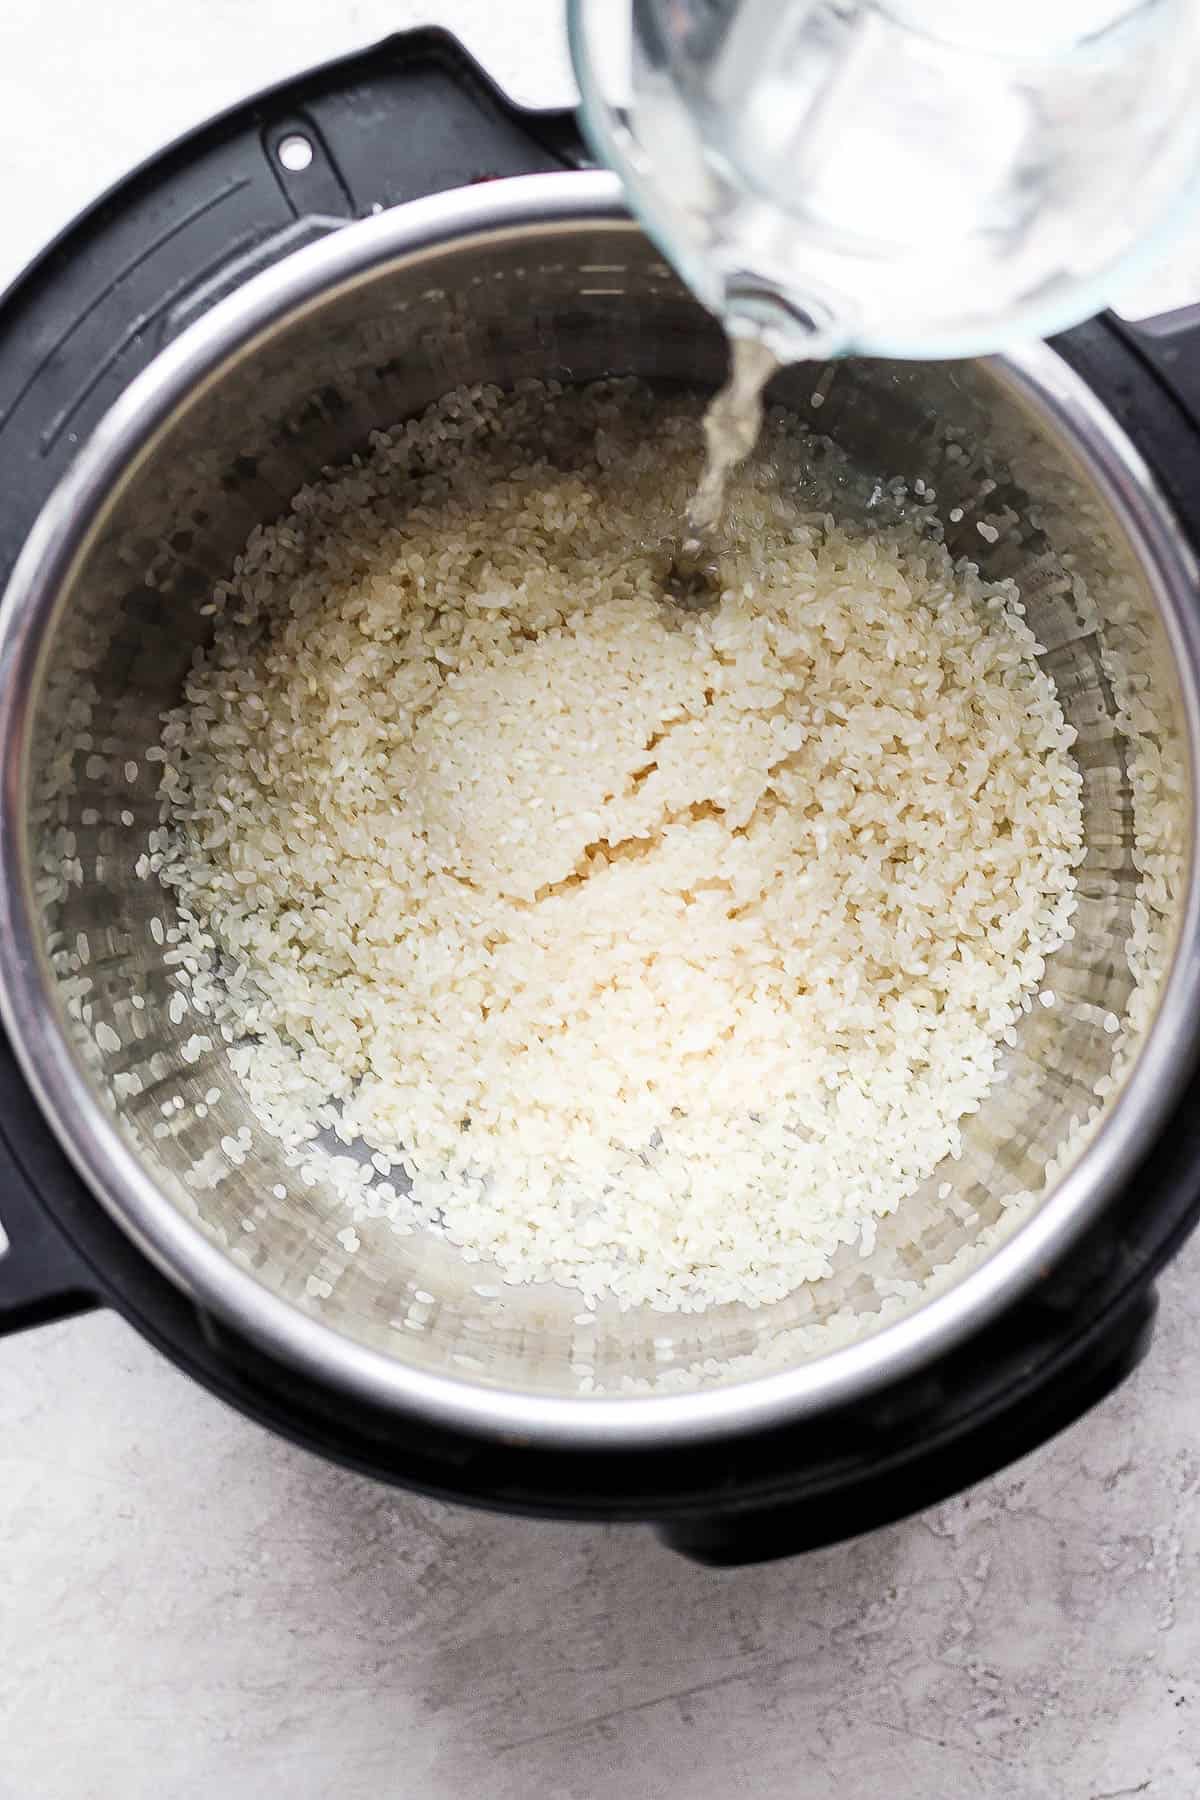 Rinsed rice in an Instant Pot with water being added.